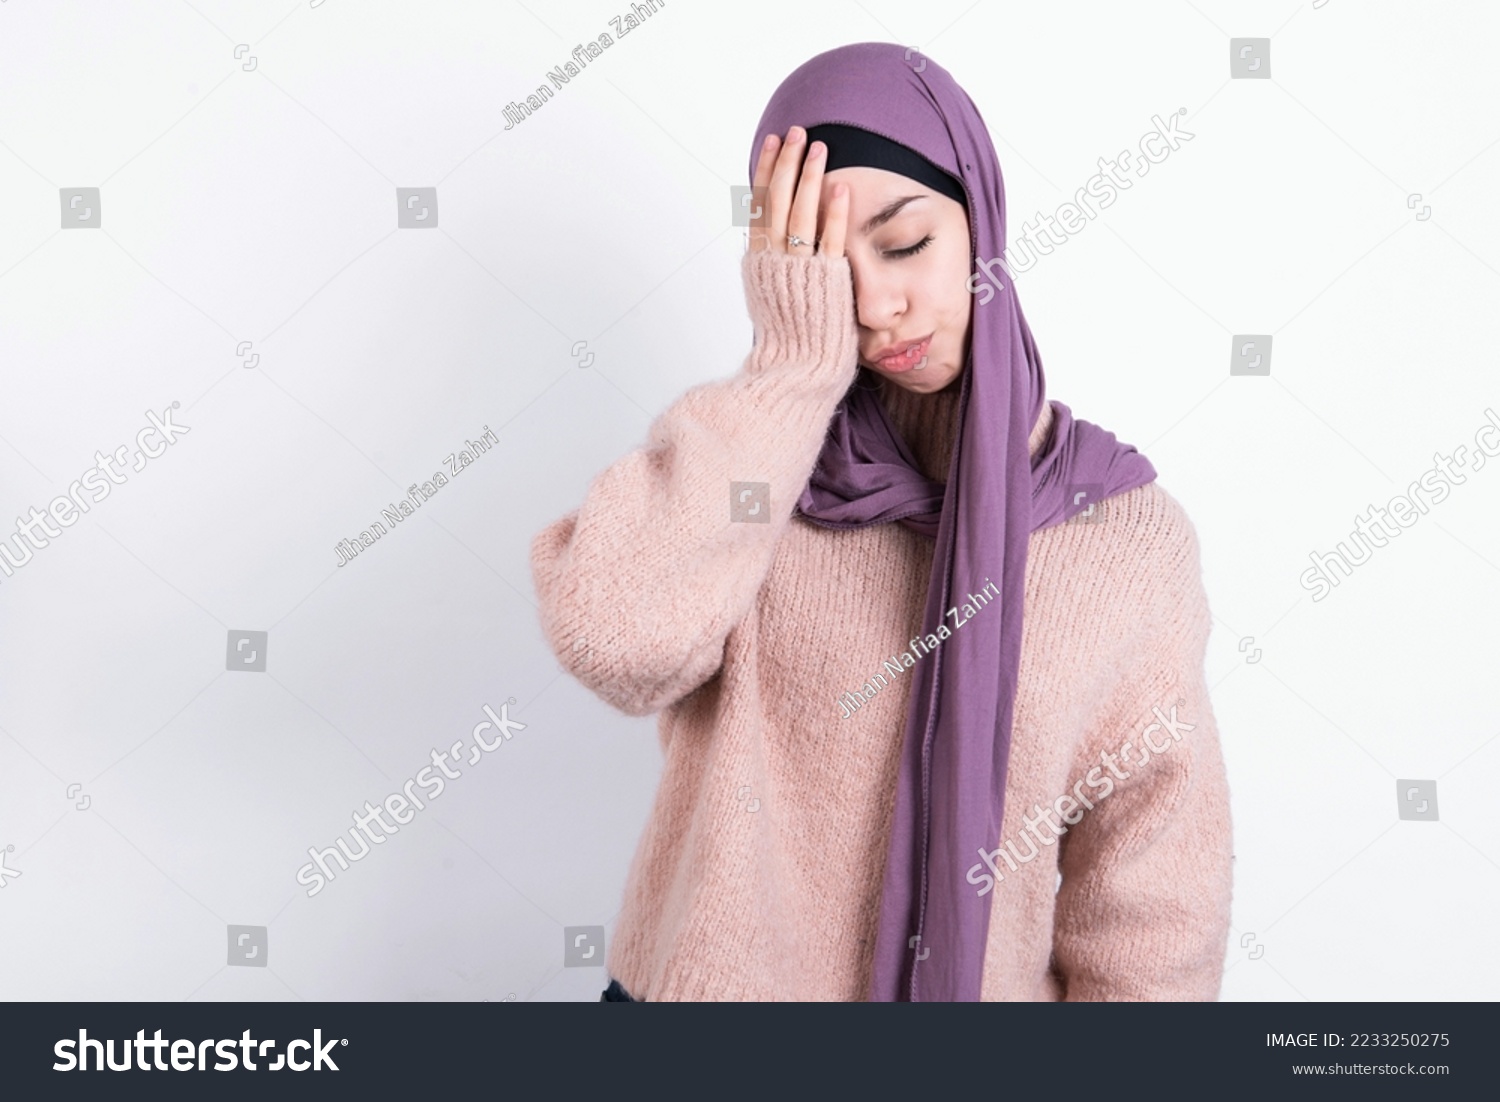 Tired overworked muslim woman wearing hijab and knitted sweater over white background has sleepy expression, gloomy look, covers face with hand, has eyes shut, gasps from tiredness, fatigue  #2233250275